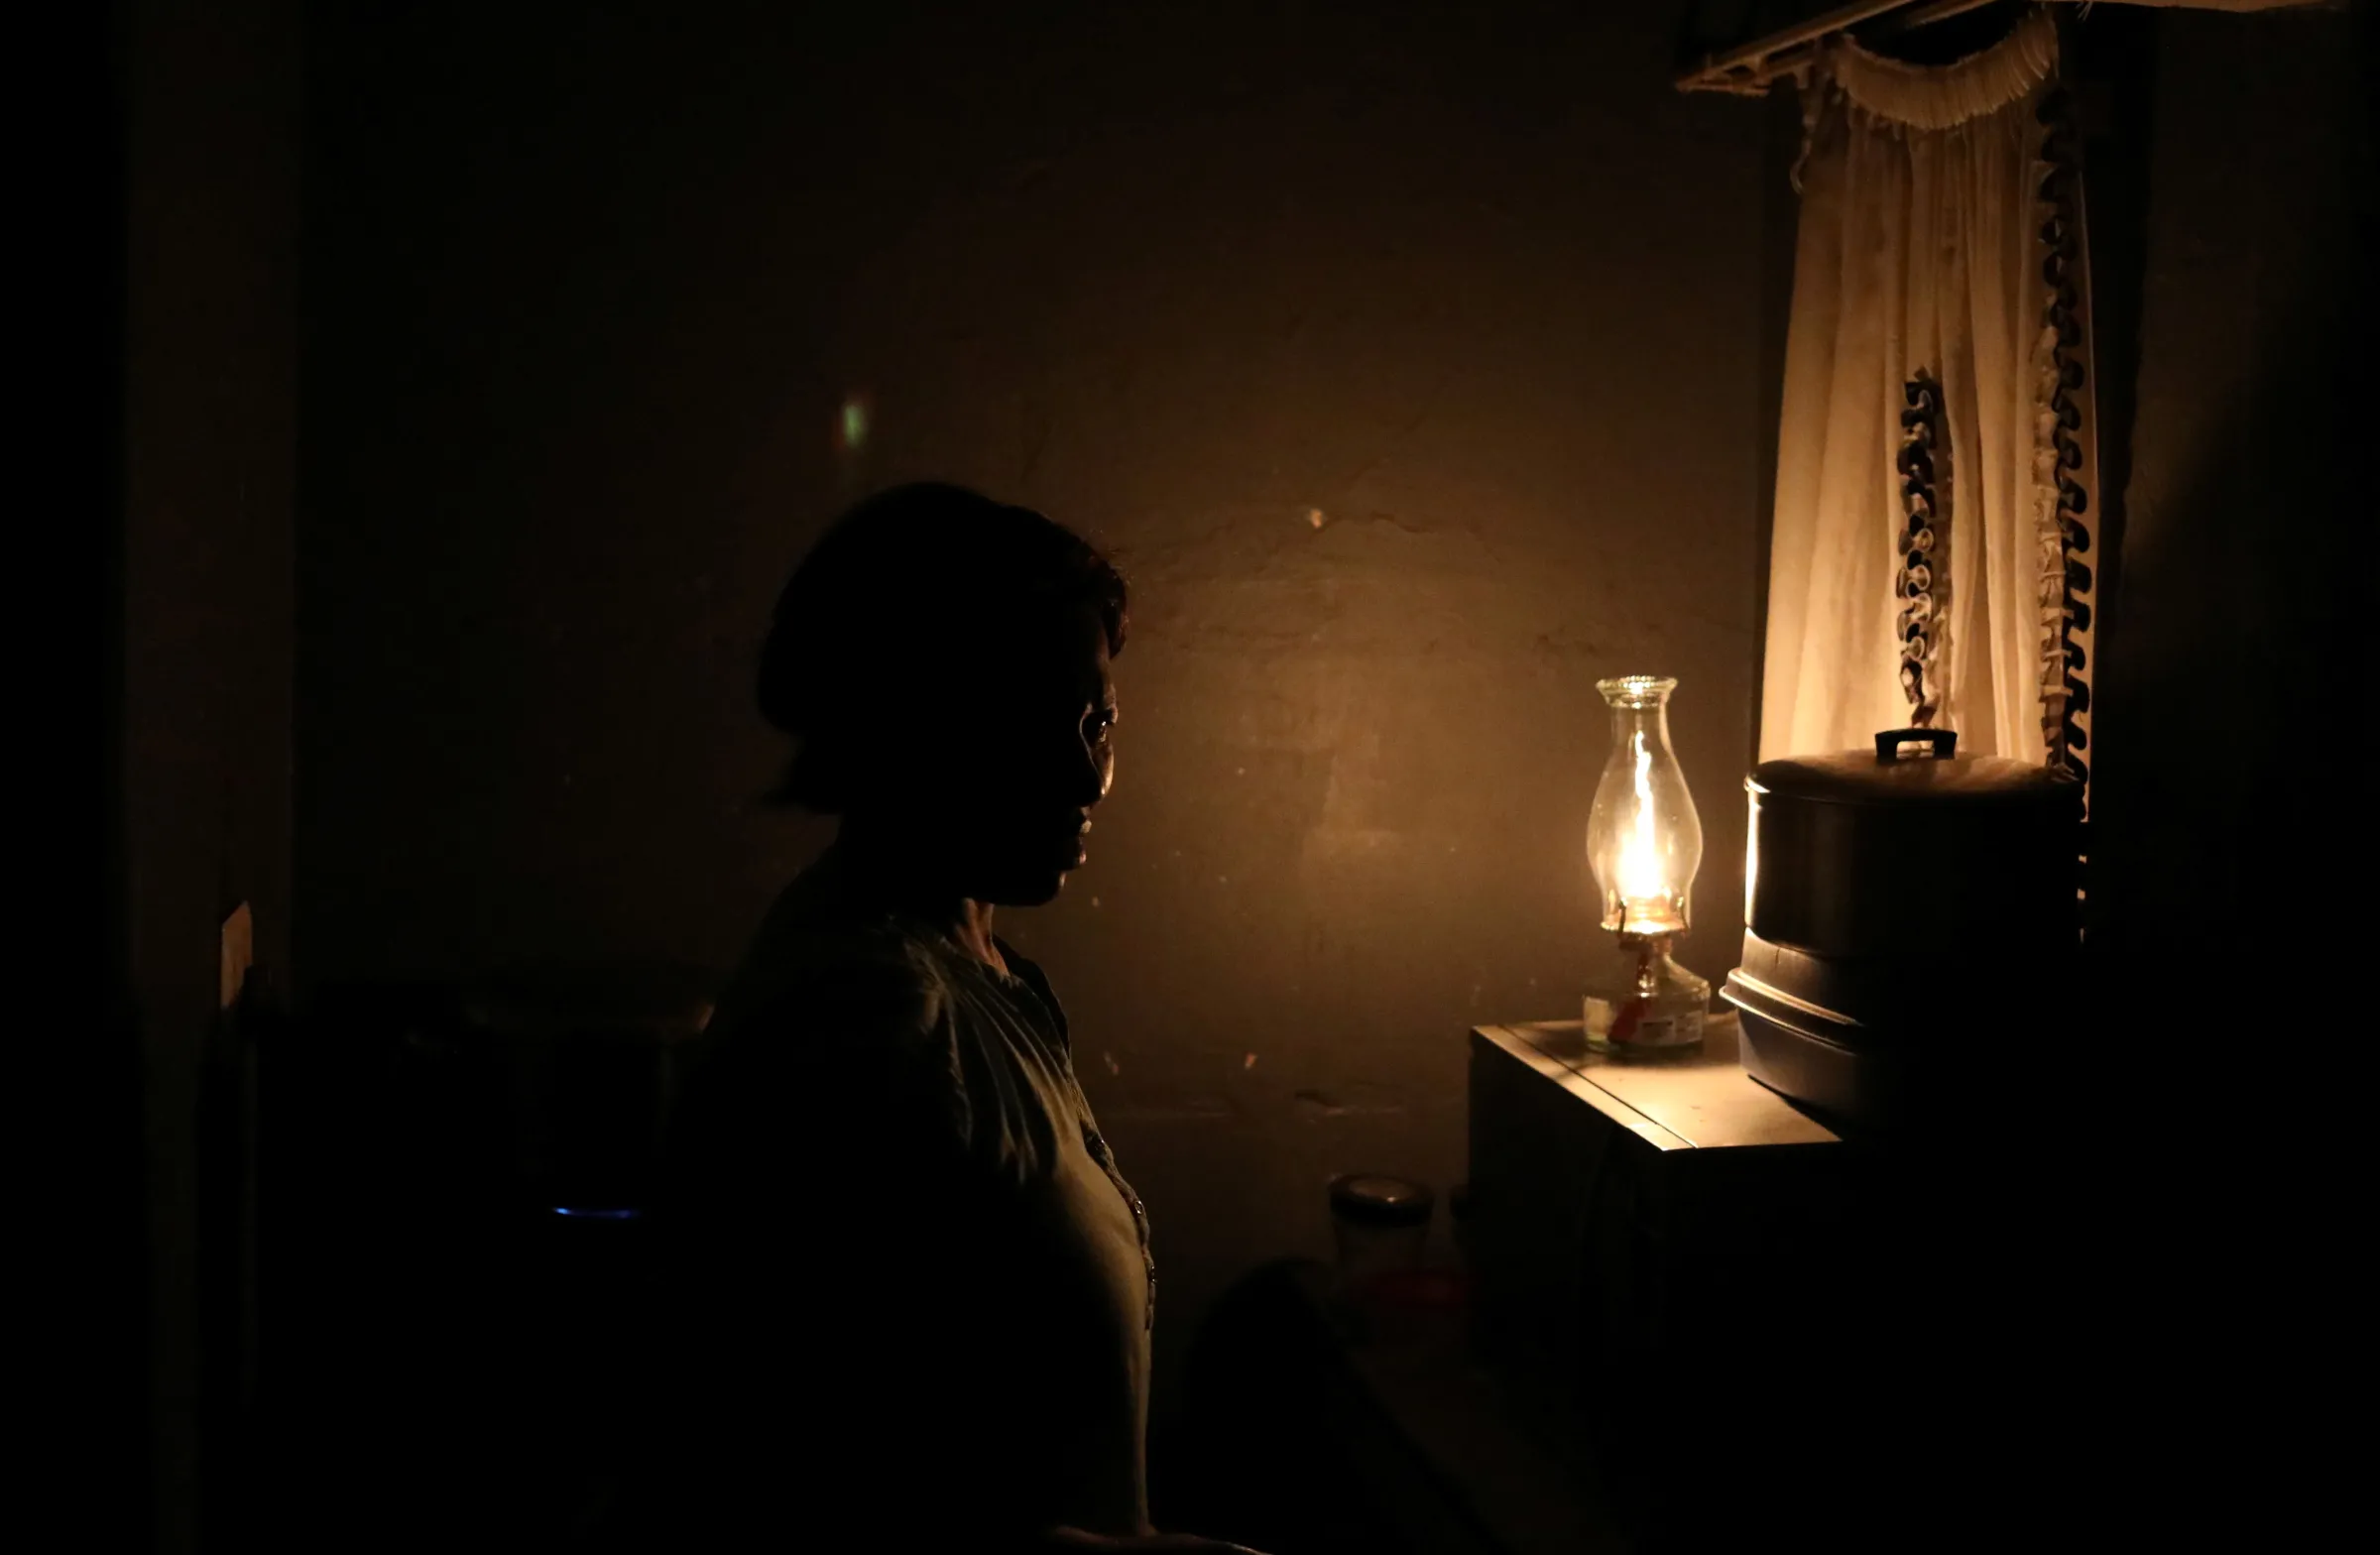 A women looks on next to a parafin light during an electricity load-shedding blackout in Soweto, South Africa, March 18, 2021. REUTERS/Siphiwe Sibeko